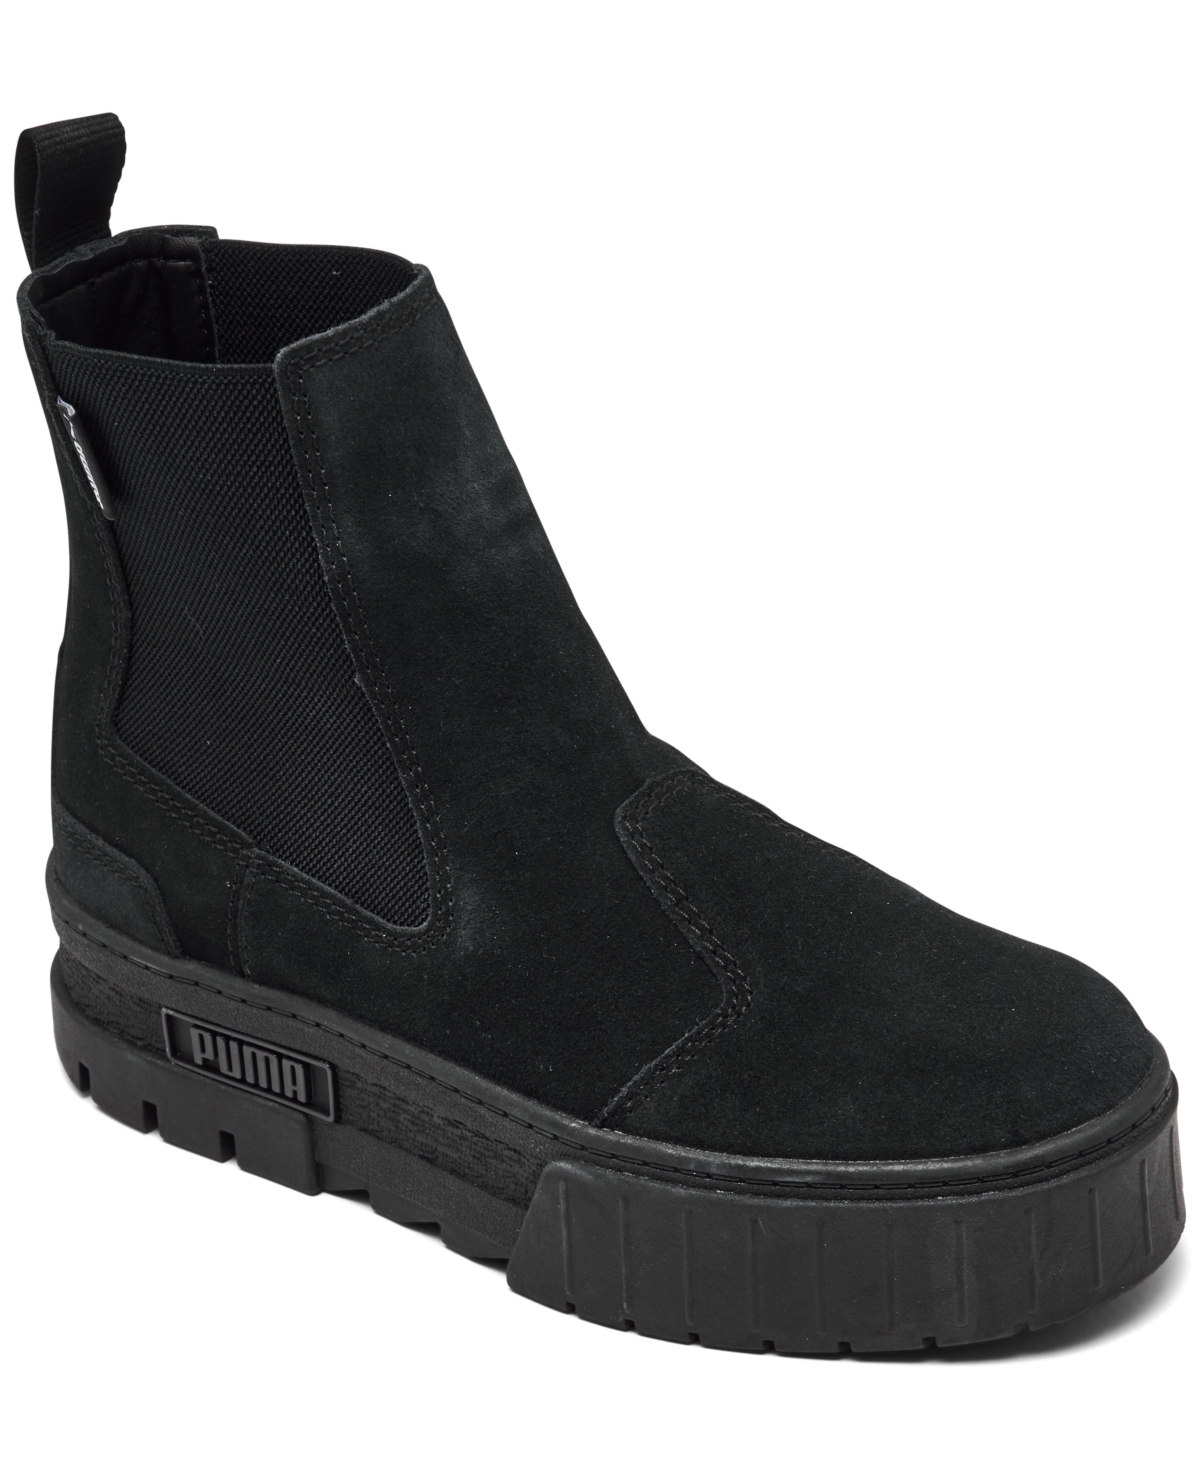 Women's Mayze Suede Chelsea Boots from Finish Line - Black